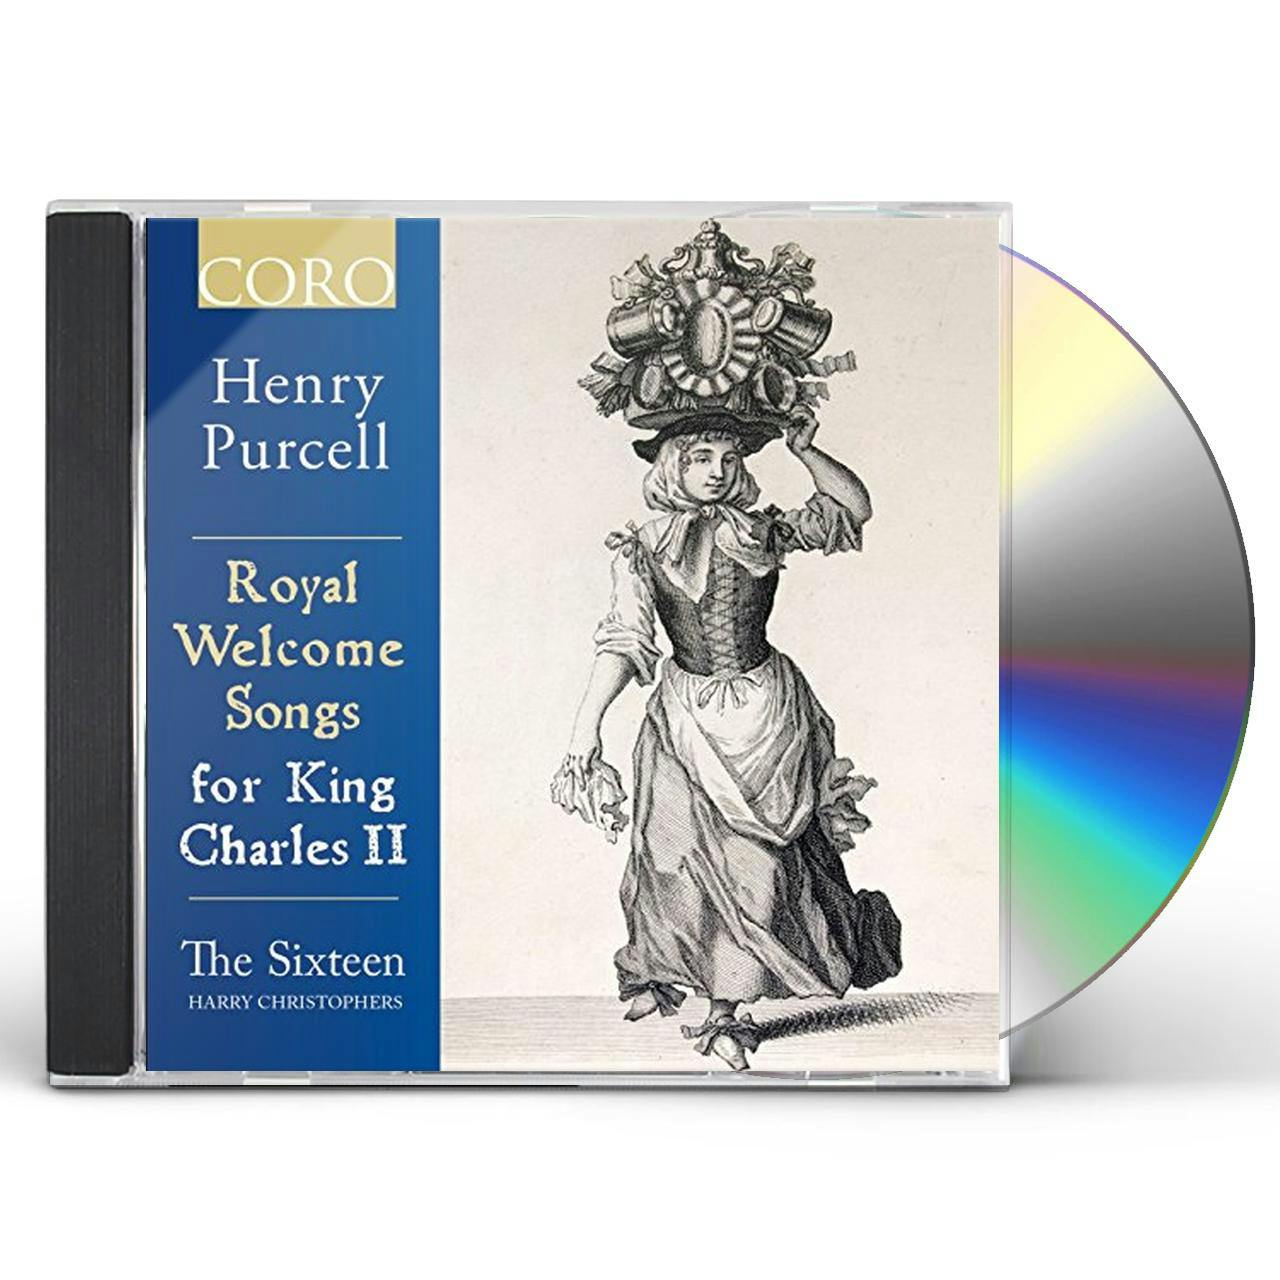 KING　Purcell　FOR　SONGS　II　ROYAL　CD　WELCOME　CHARLES